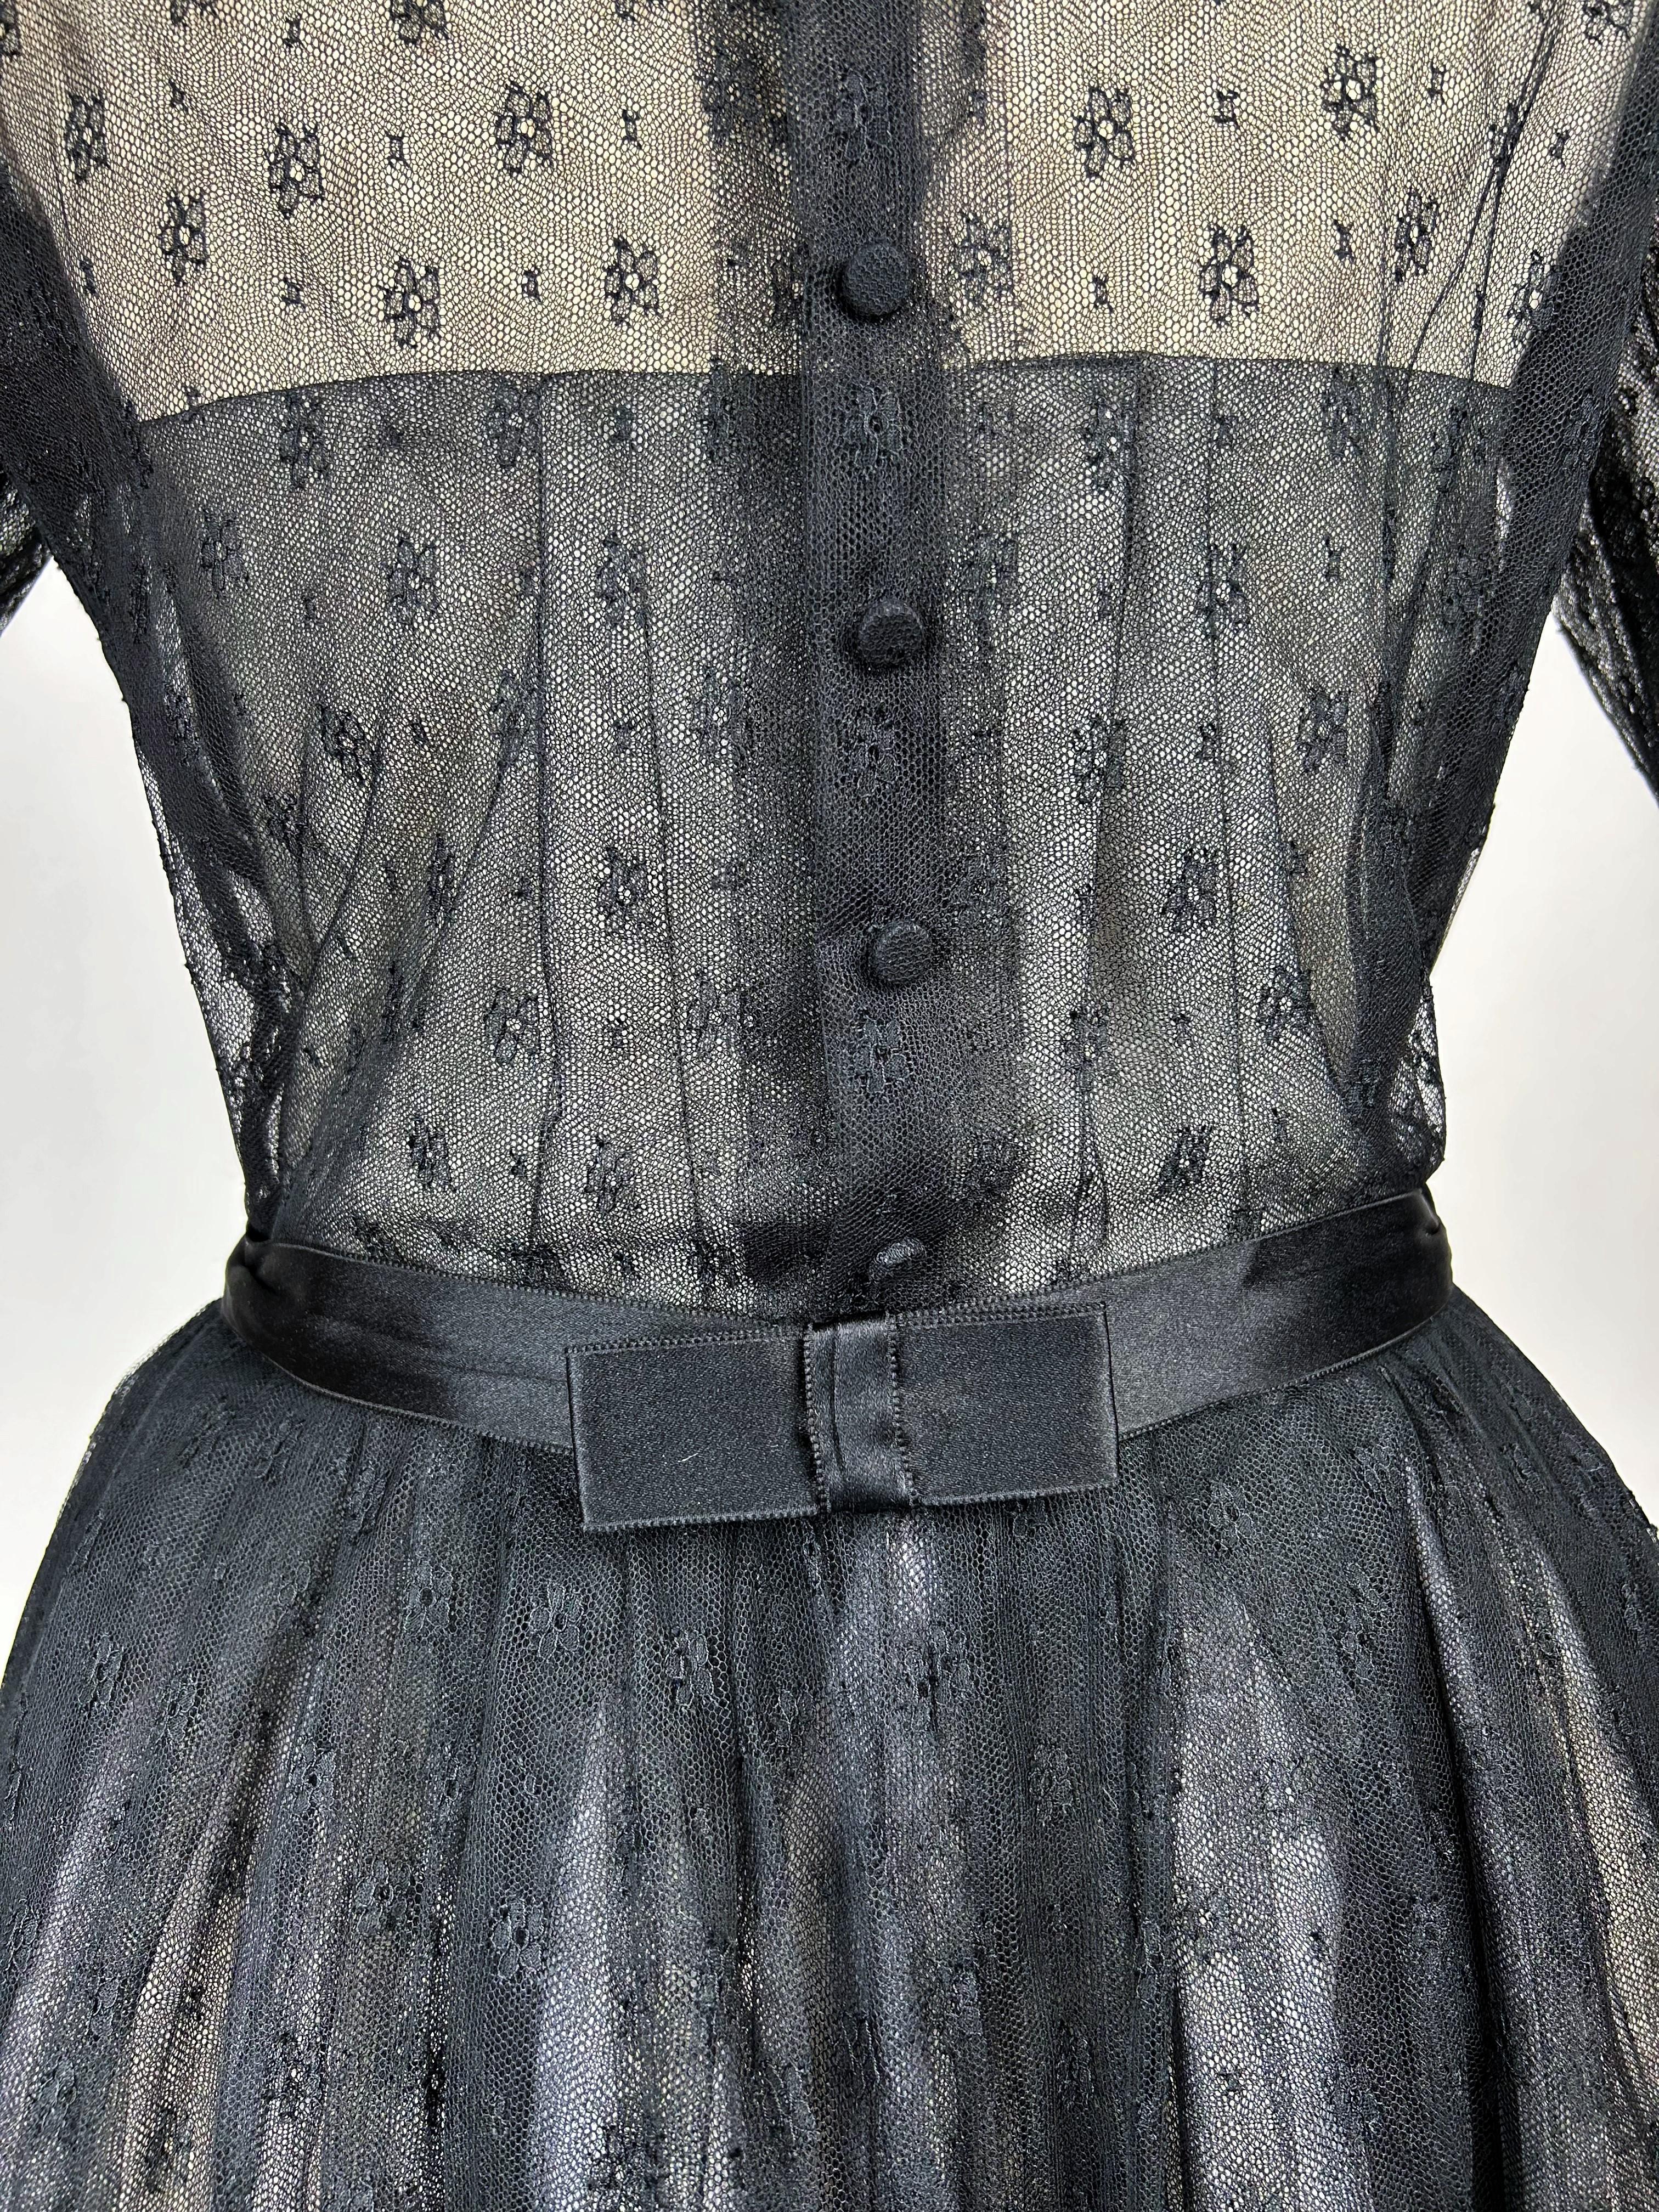 Christian Dior/Saint Laurent Couture Lace Dress (attributed to) Almaviva C.1960 6